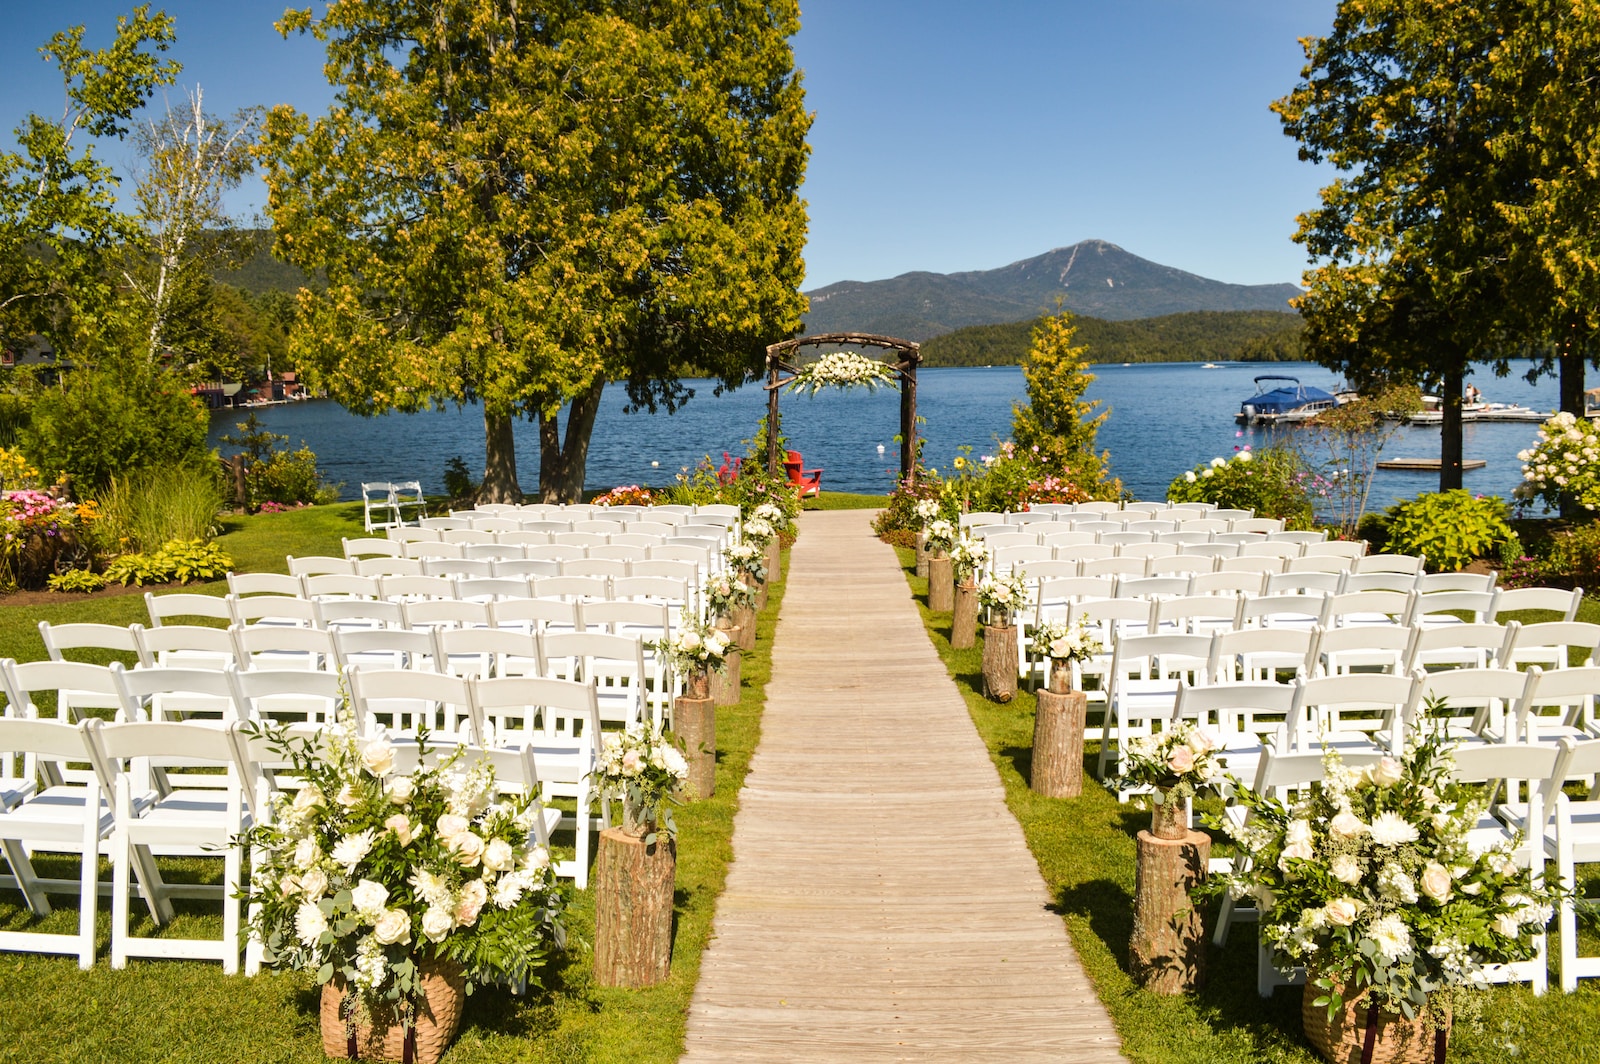 Top-rated wedding locations in picturesque Scotland for your dream ceremony